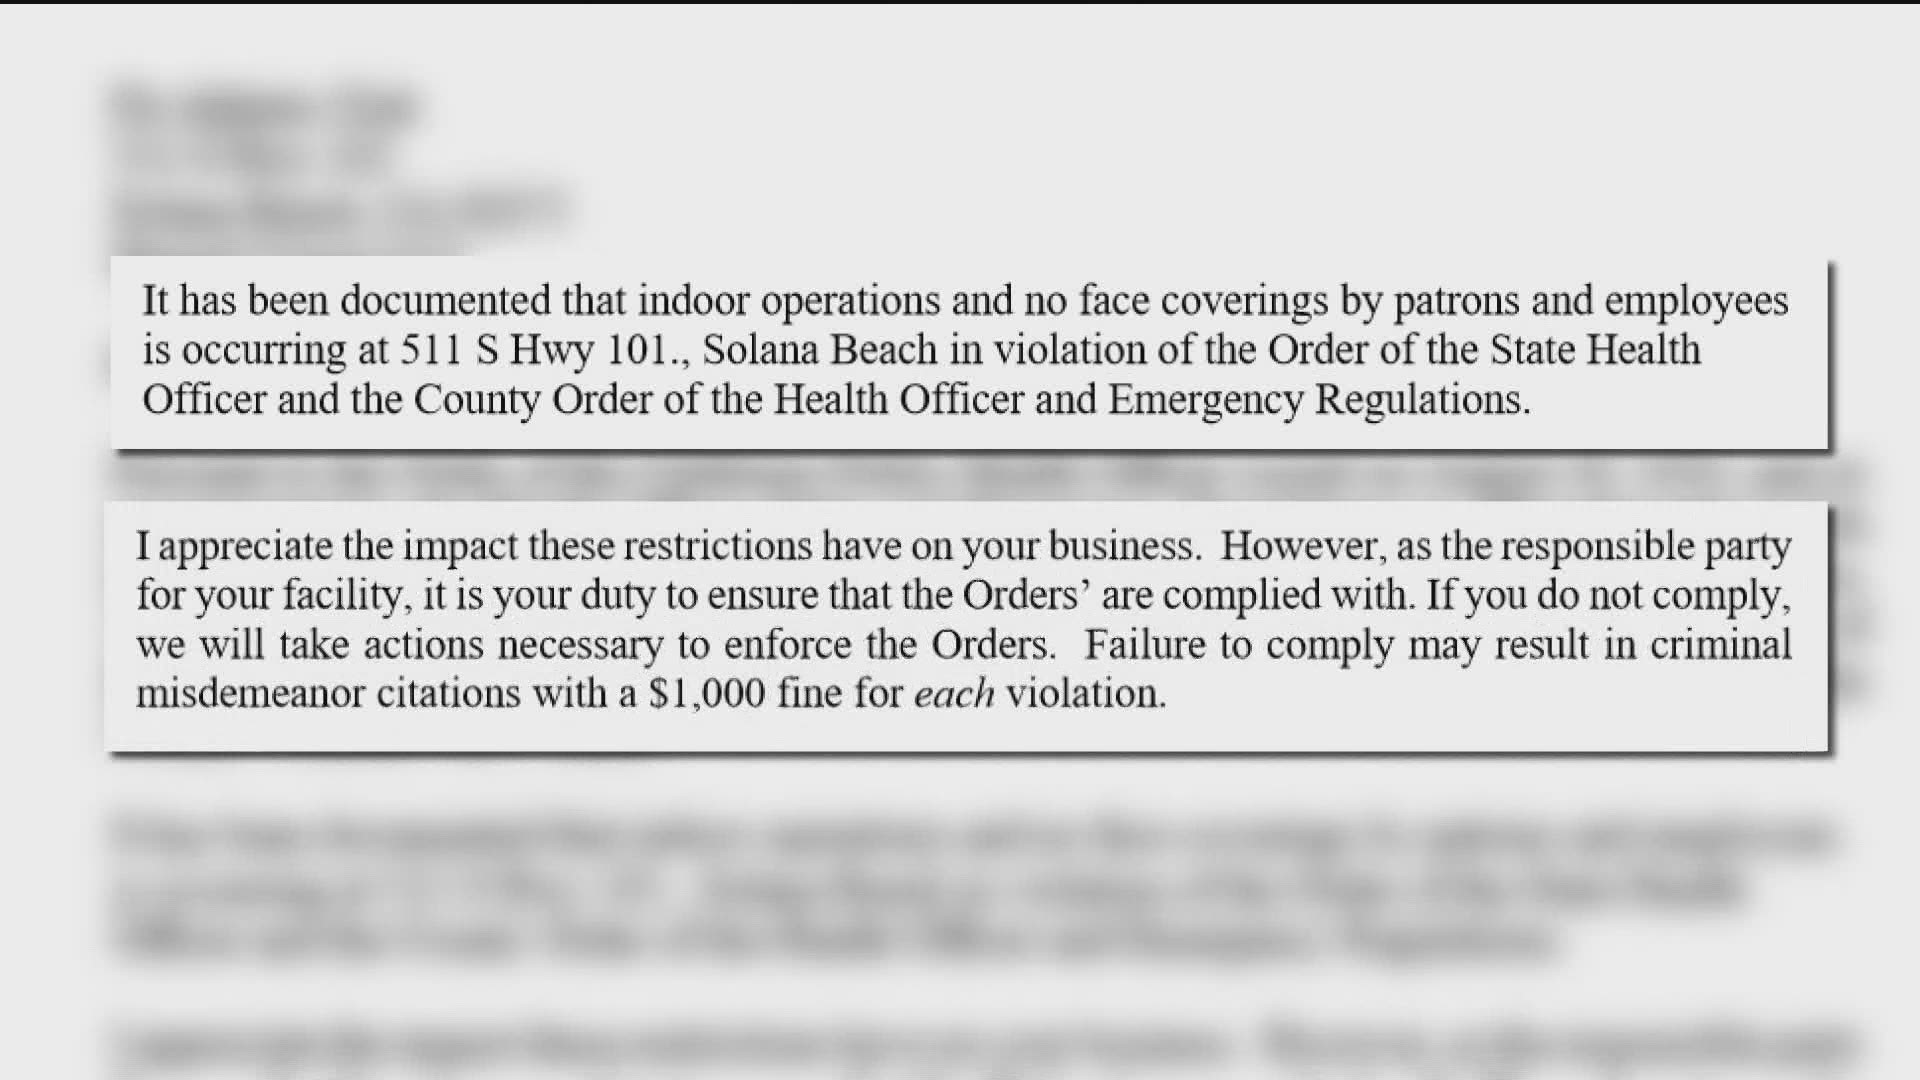 More than a dozen businesses have received cease and desist letters countywide as of Monday.